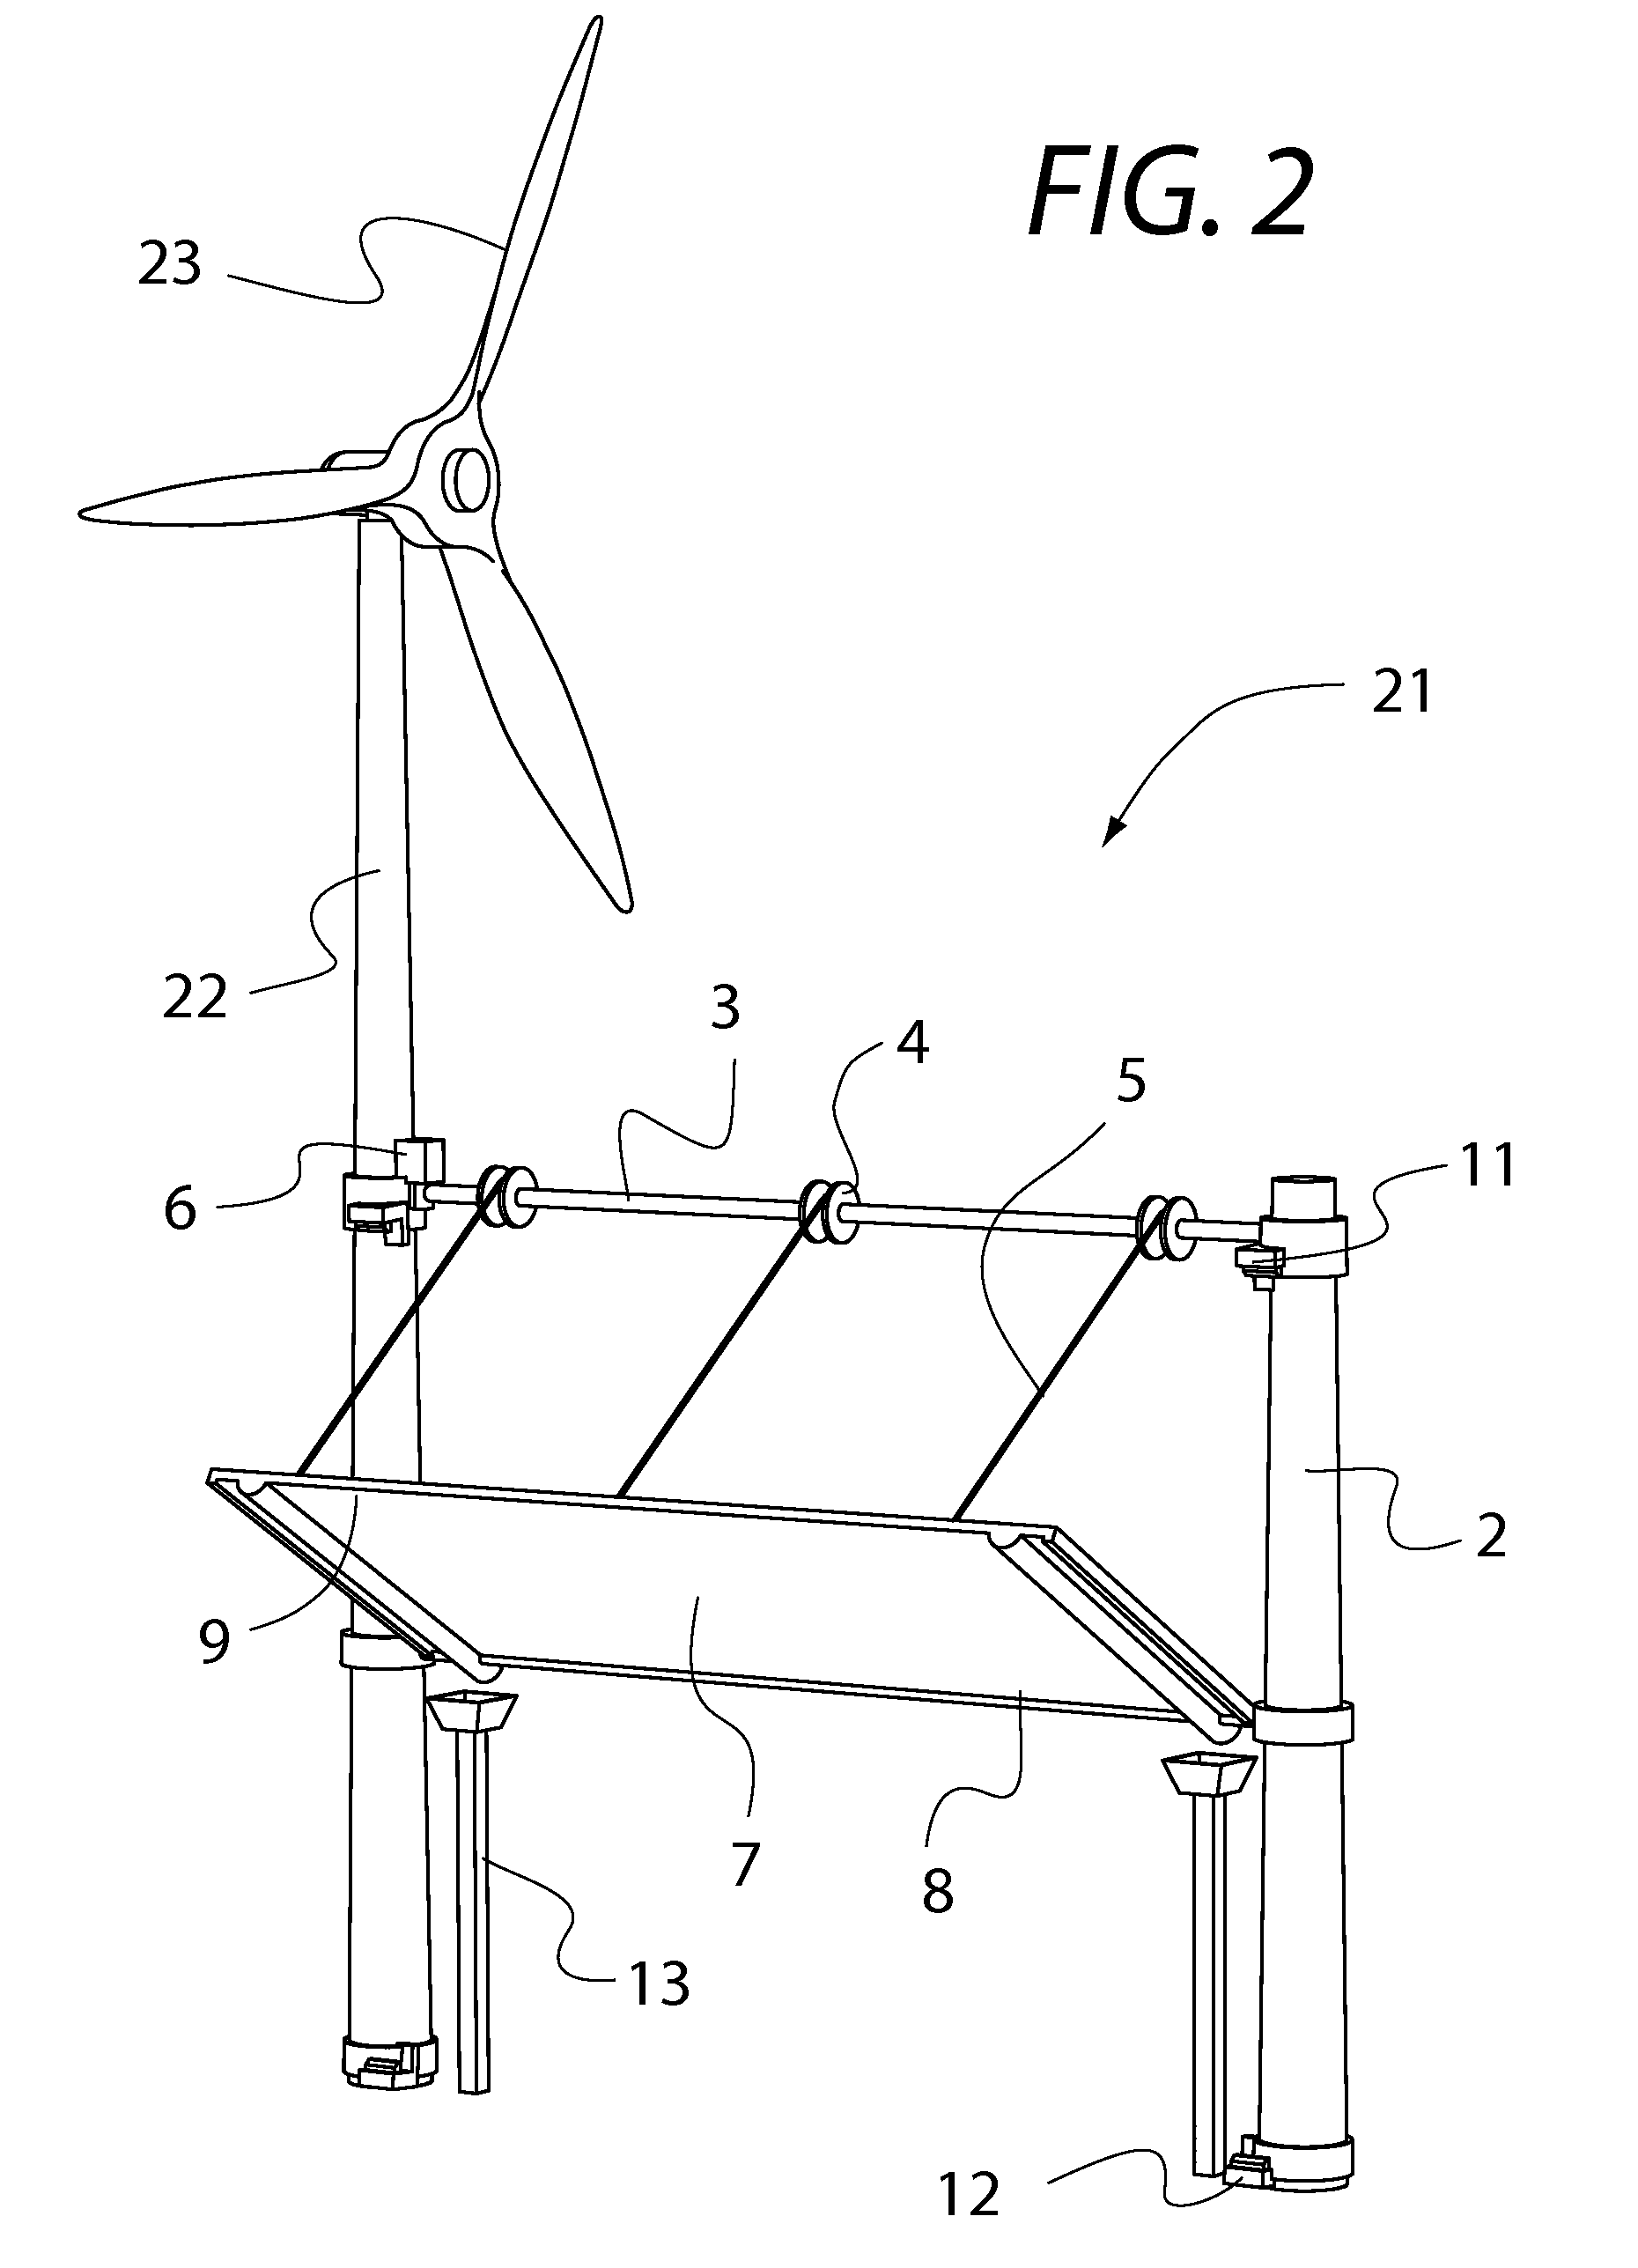 Apparatus and Method for Regulation of Carbon Dioxide Content in Atmosphere